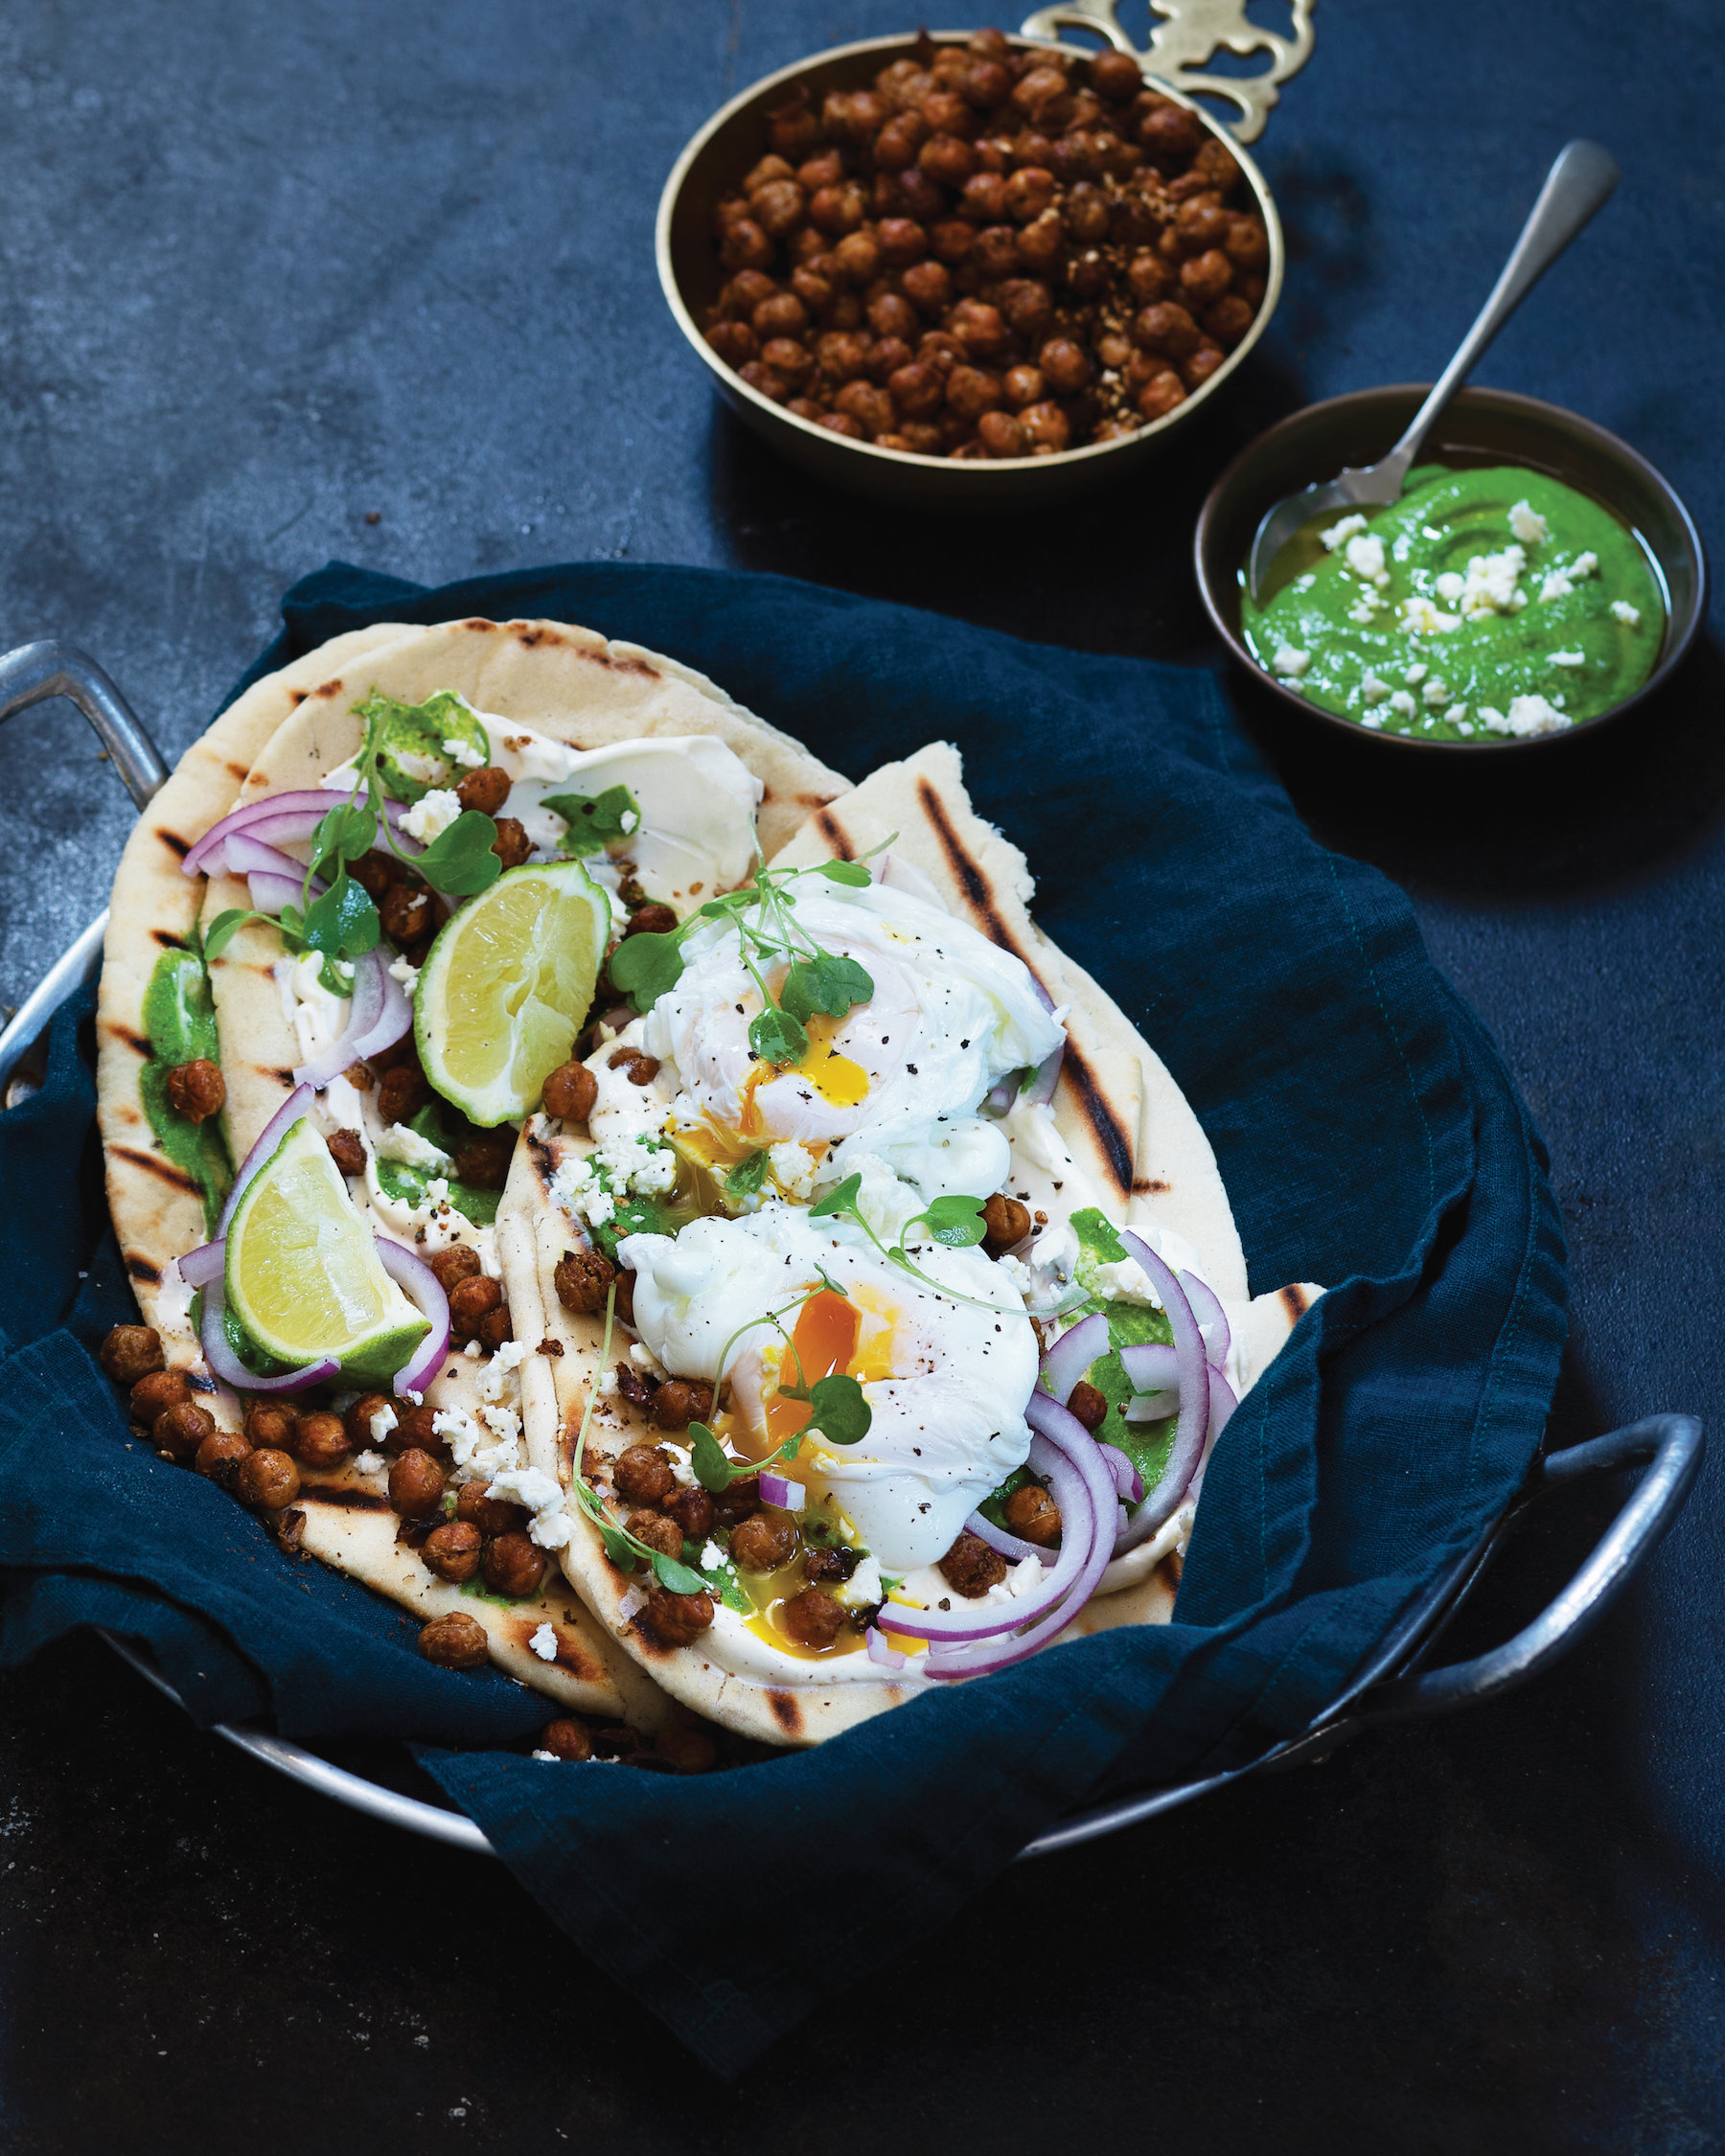 You are currently viewing Grilled breakfast naan with spinach pesto and chickpeas